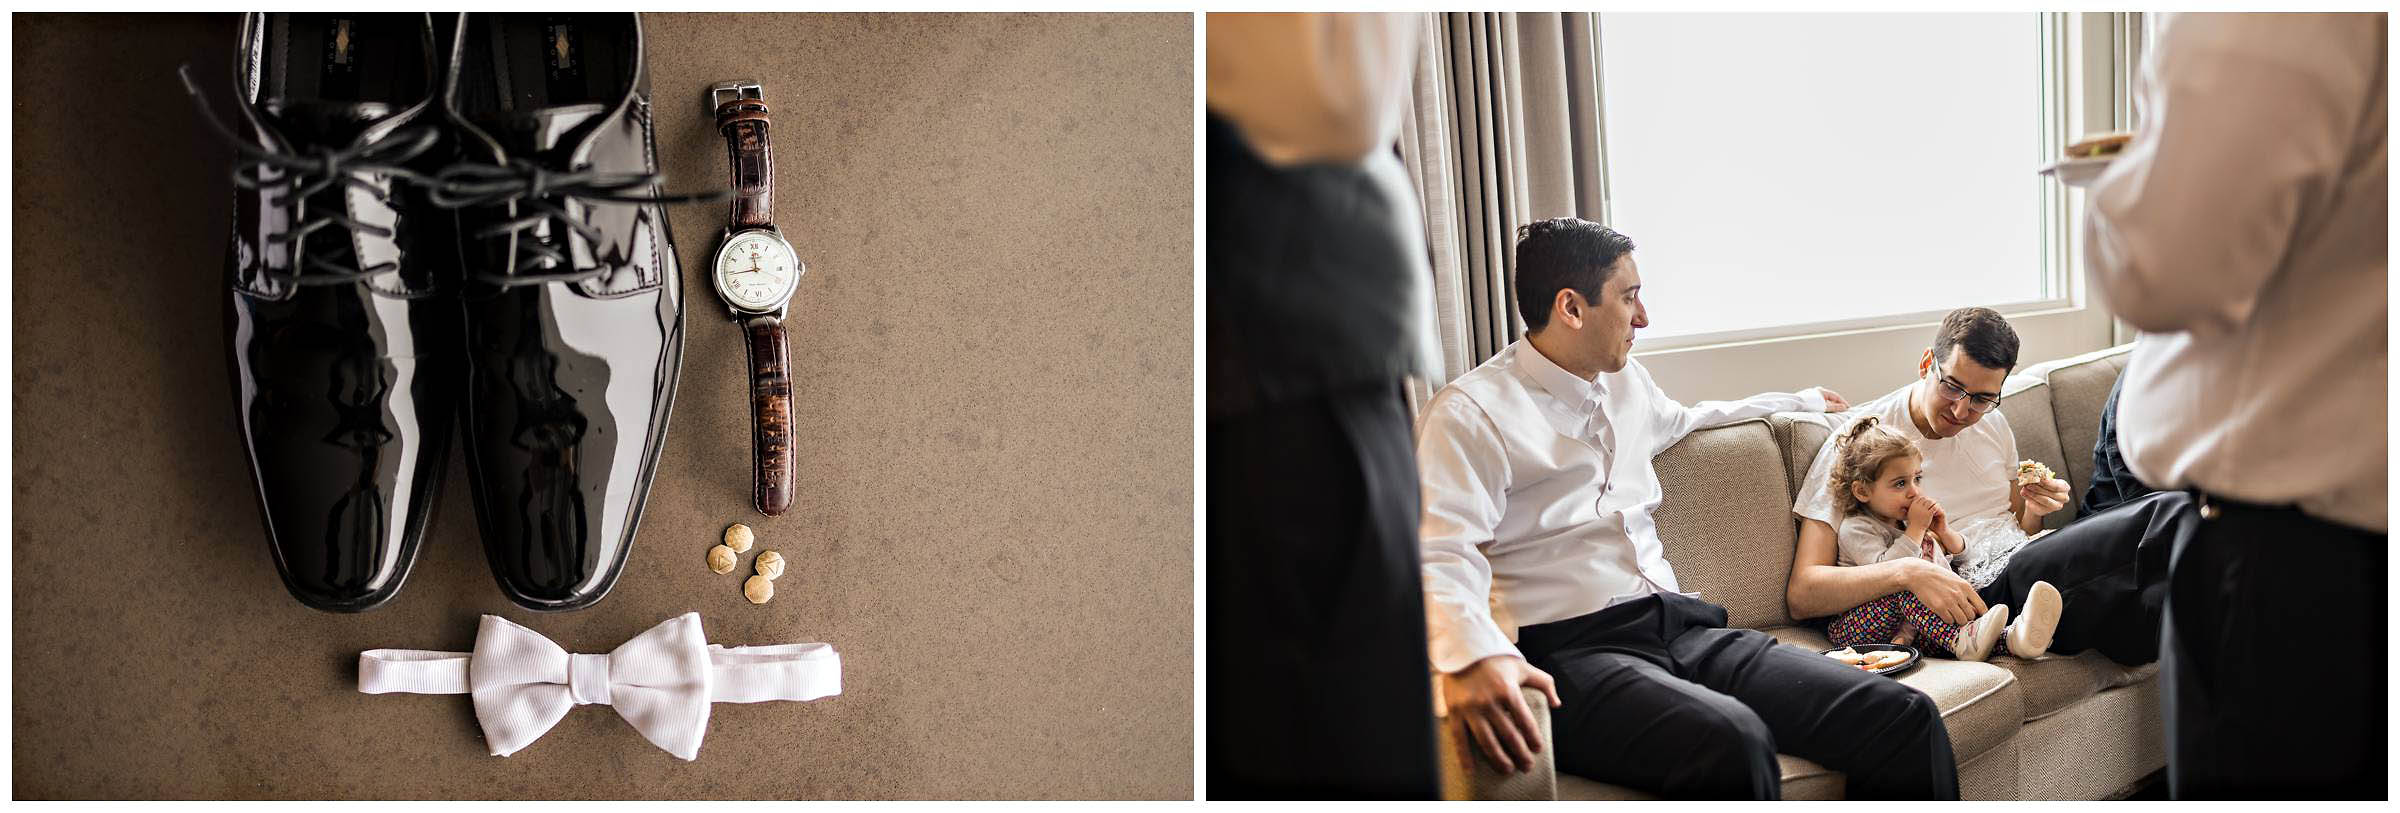 Detailed shot of groom's shoes, watch, cuff links, bowtie; groomsmen are sitting on couch with little girl by Detroit Wedding Photographer Michele Maloney